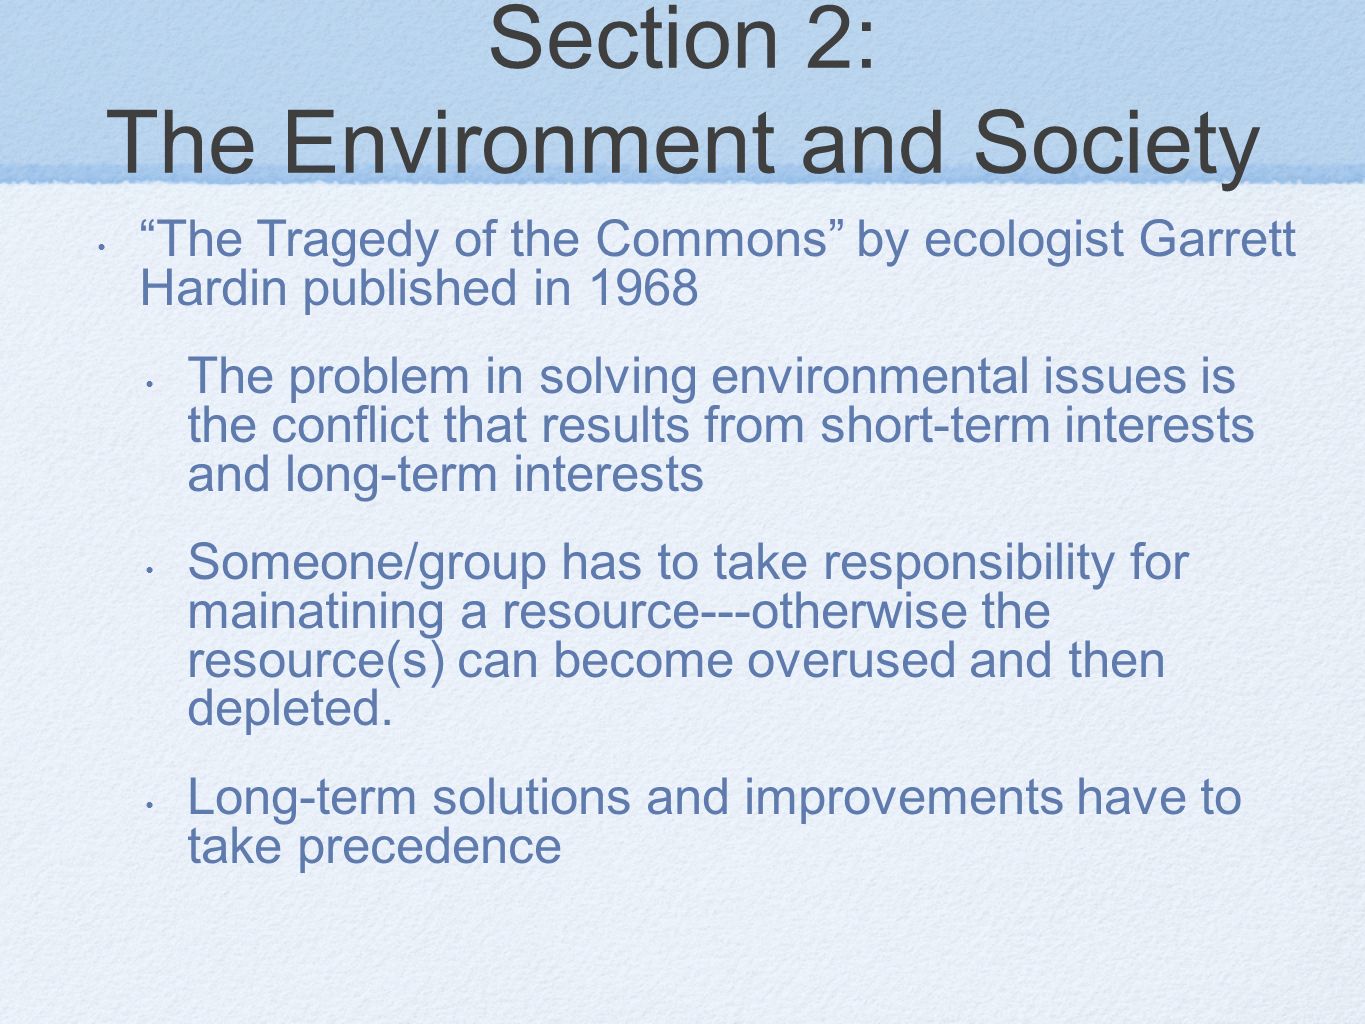 Section 2: The Environment and Society